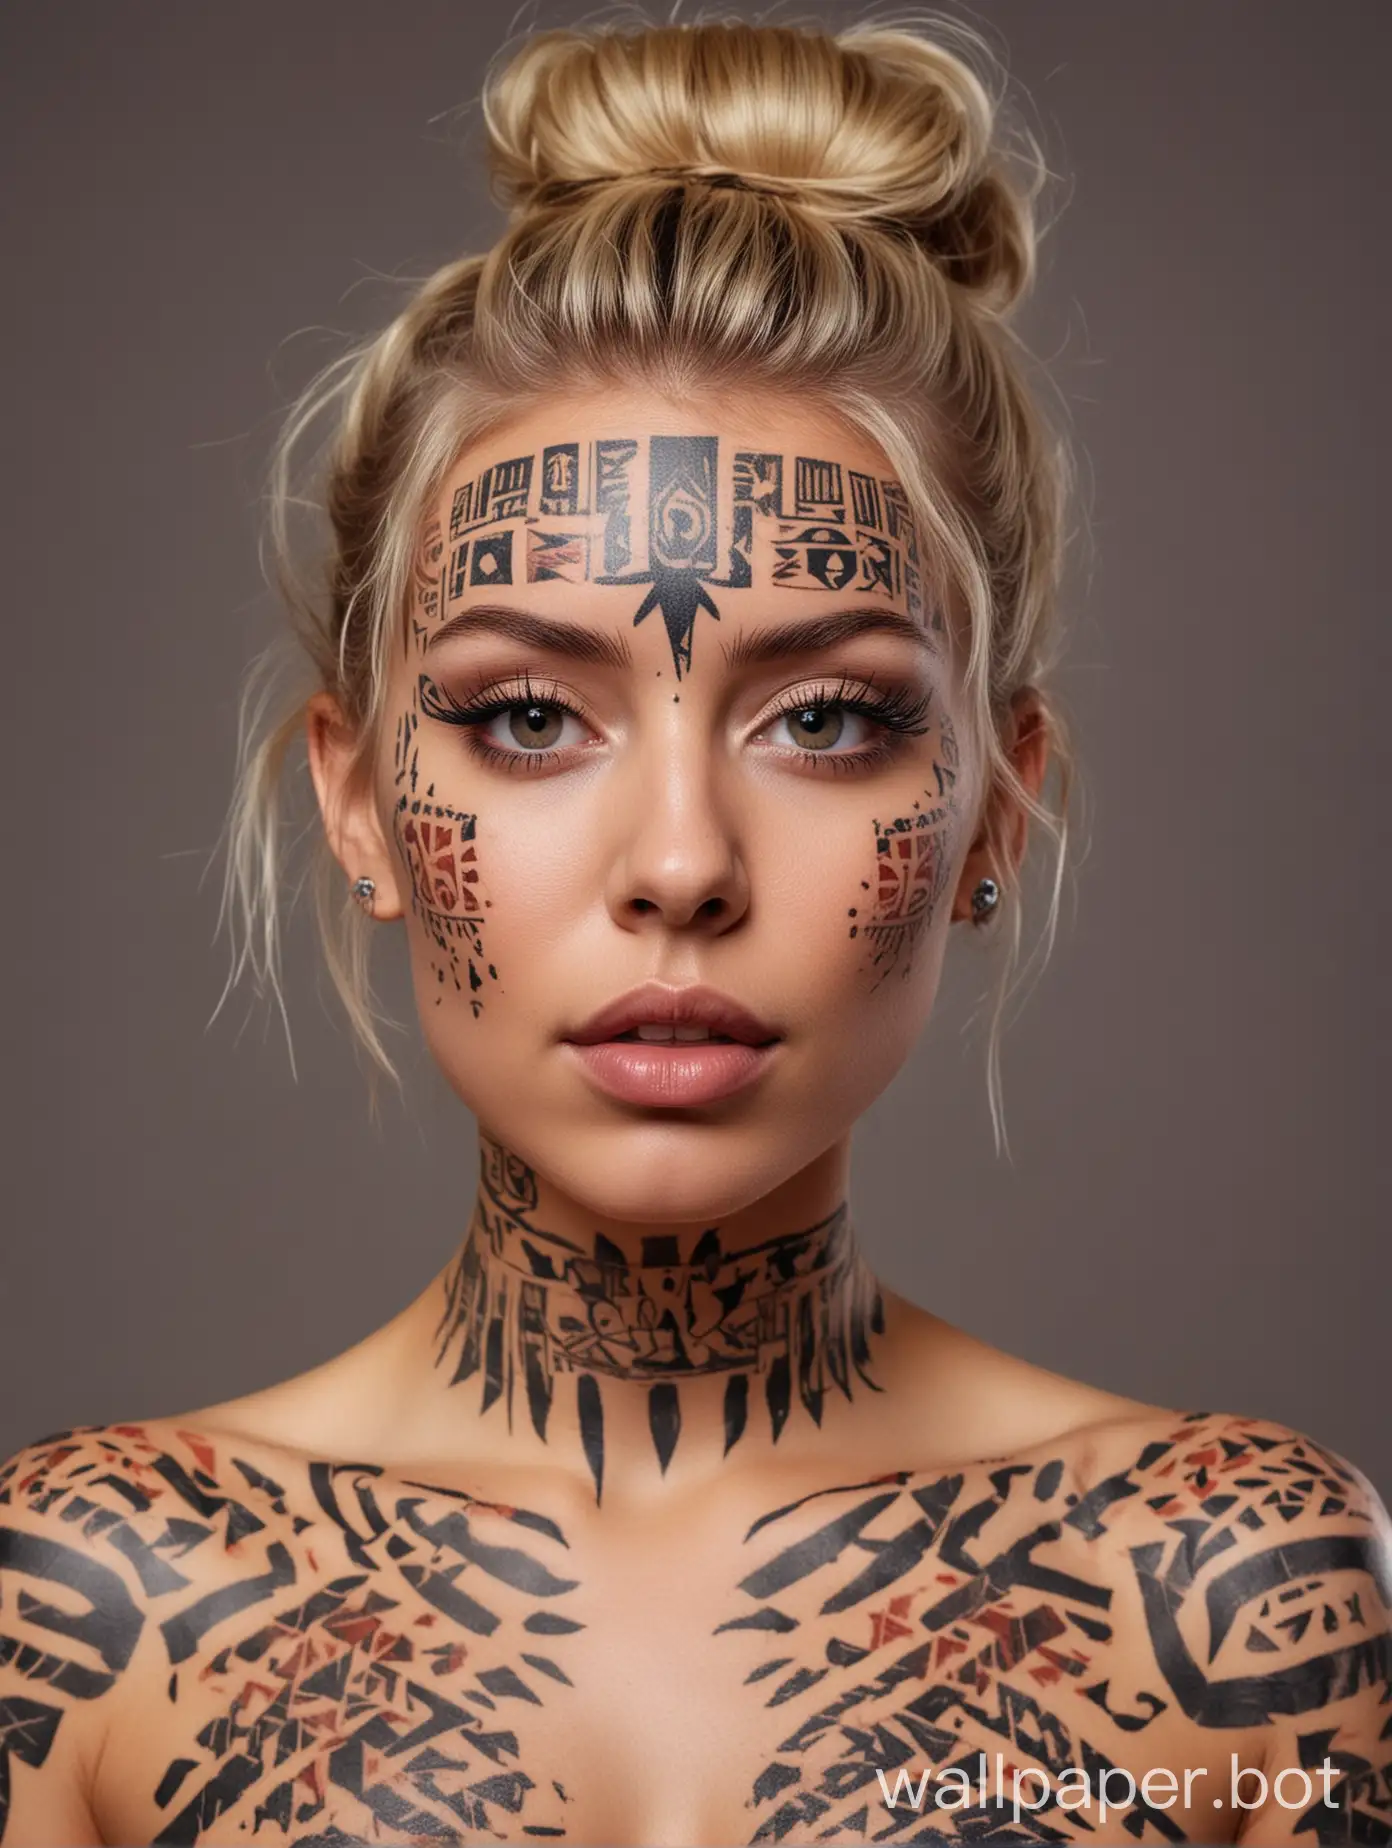 Blonde-Woman-with-Colorful-Tribal-Tattoos-in-a-Modest-Pose